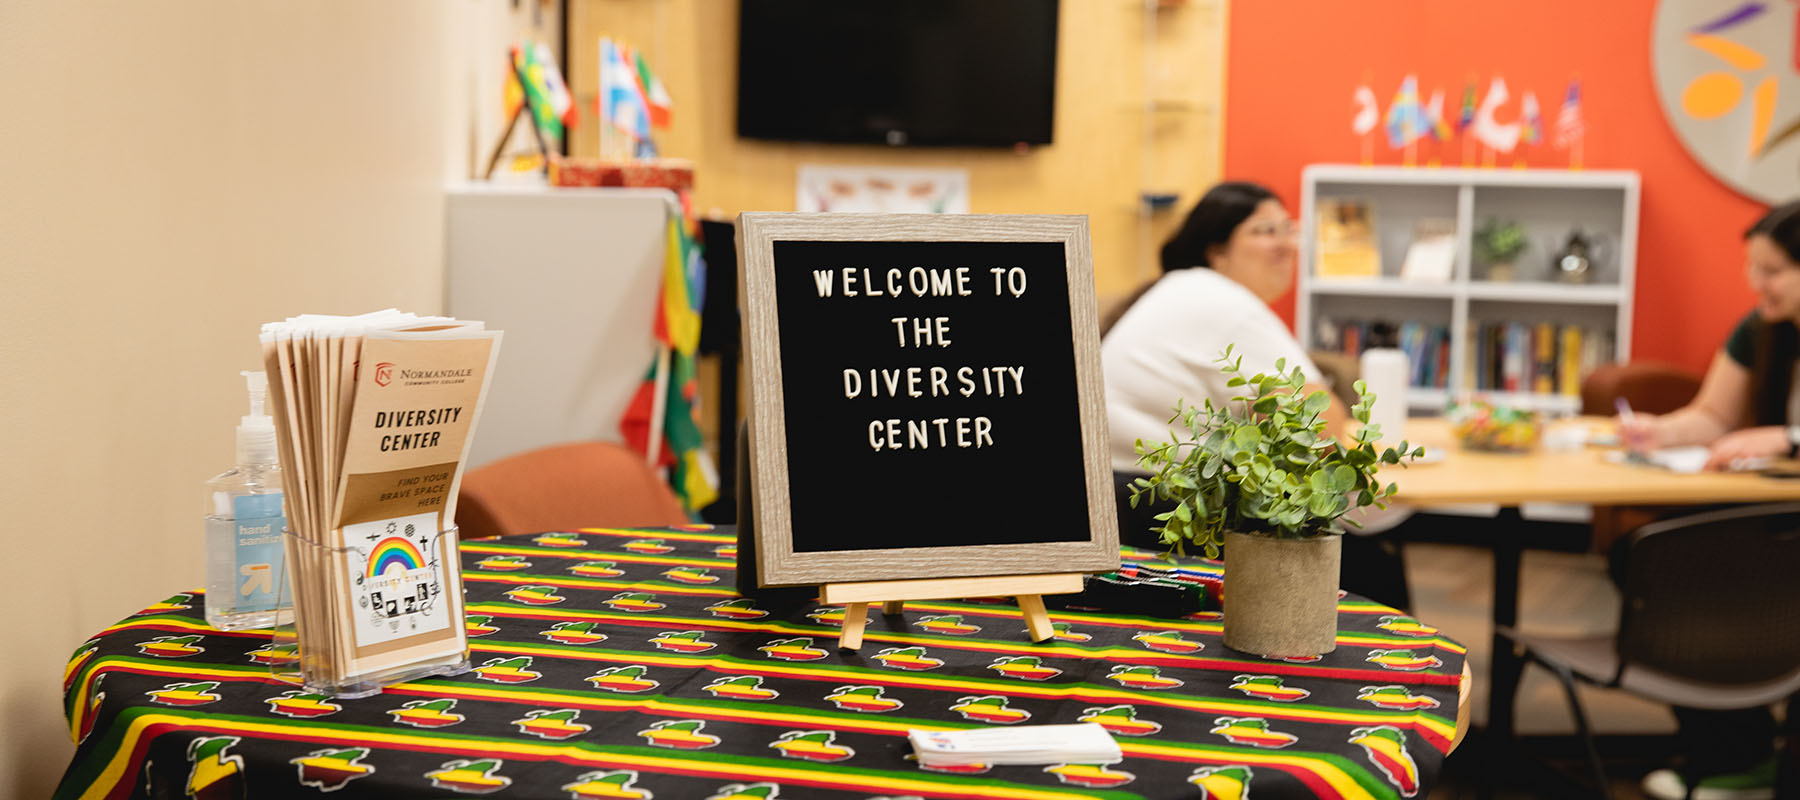 A sign that says "Welcome to the Diversity Center" in the Diversity Center.